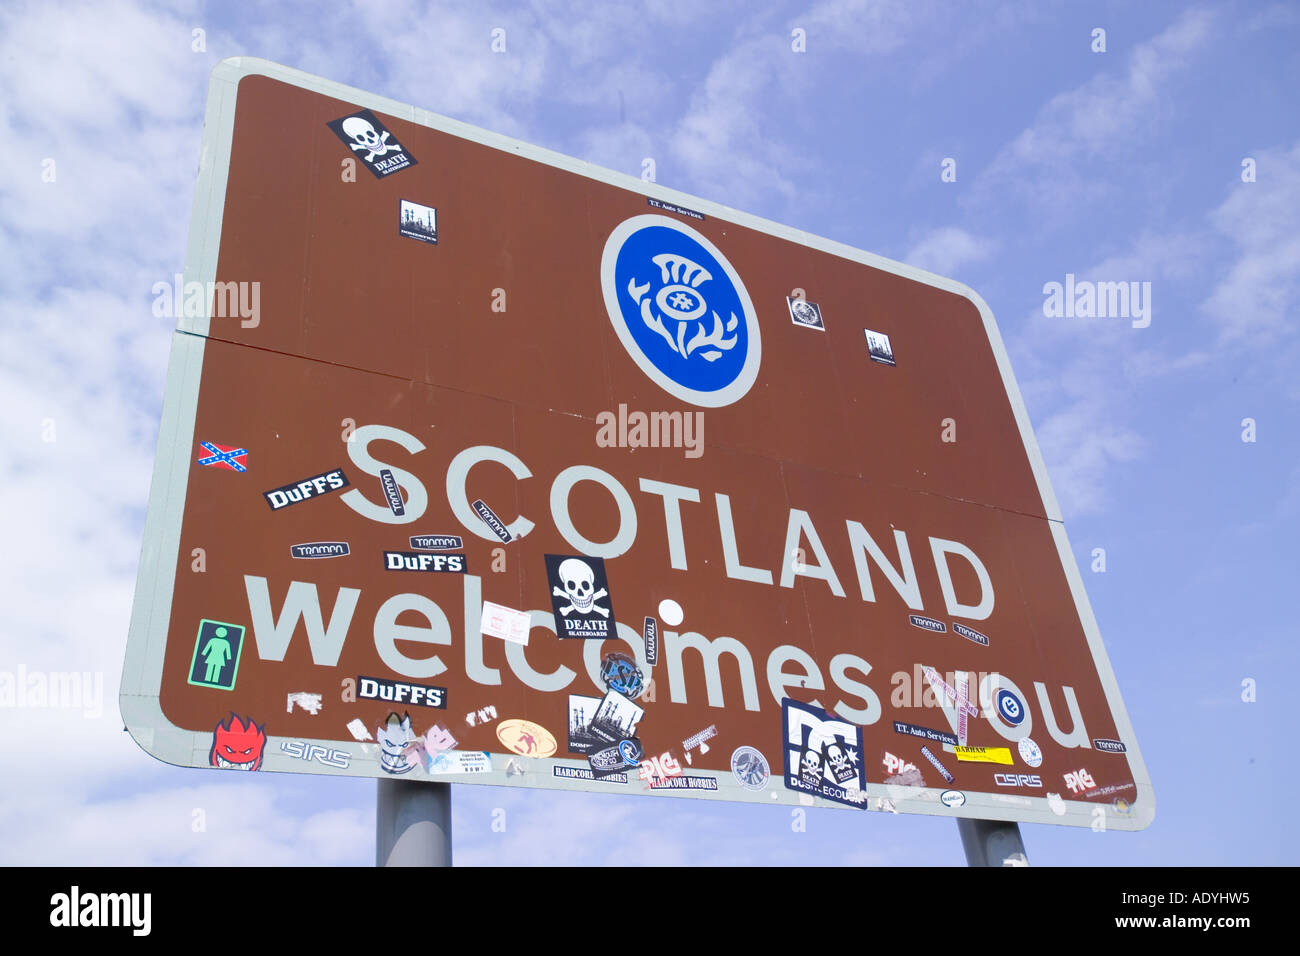 Welcome to Scotland sign at the Scottish border at Berwick upon tweed with graffiti Stock Photo